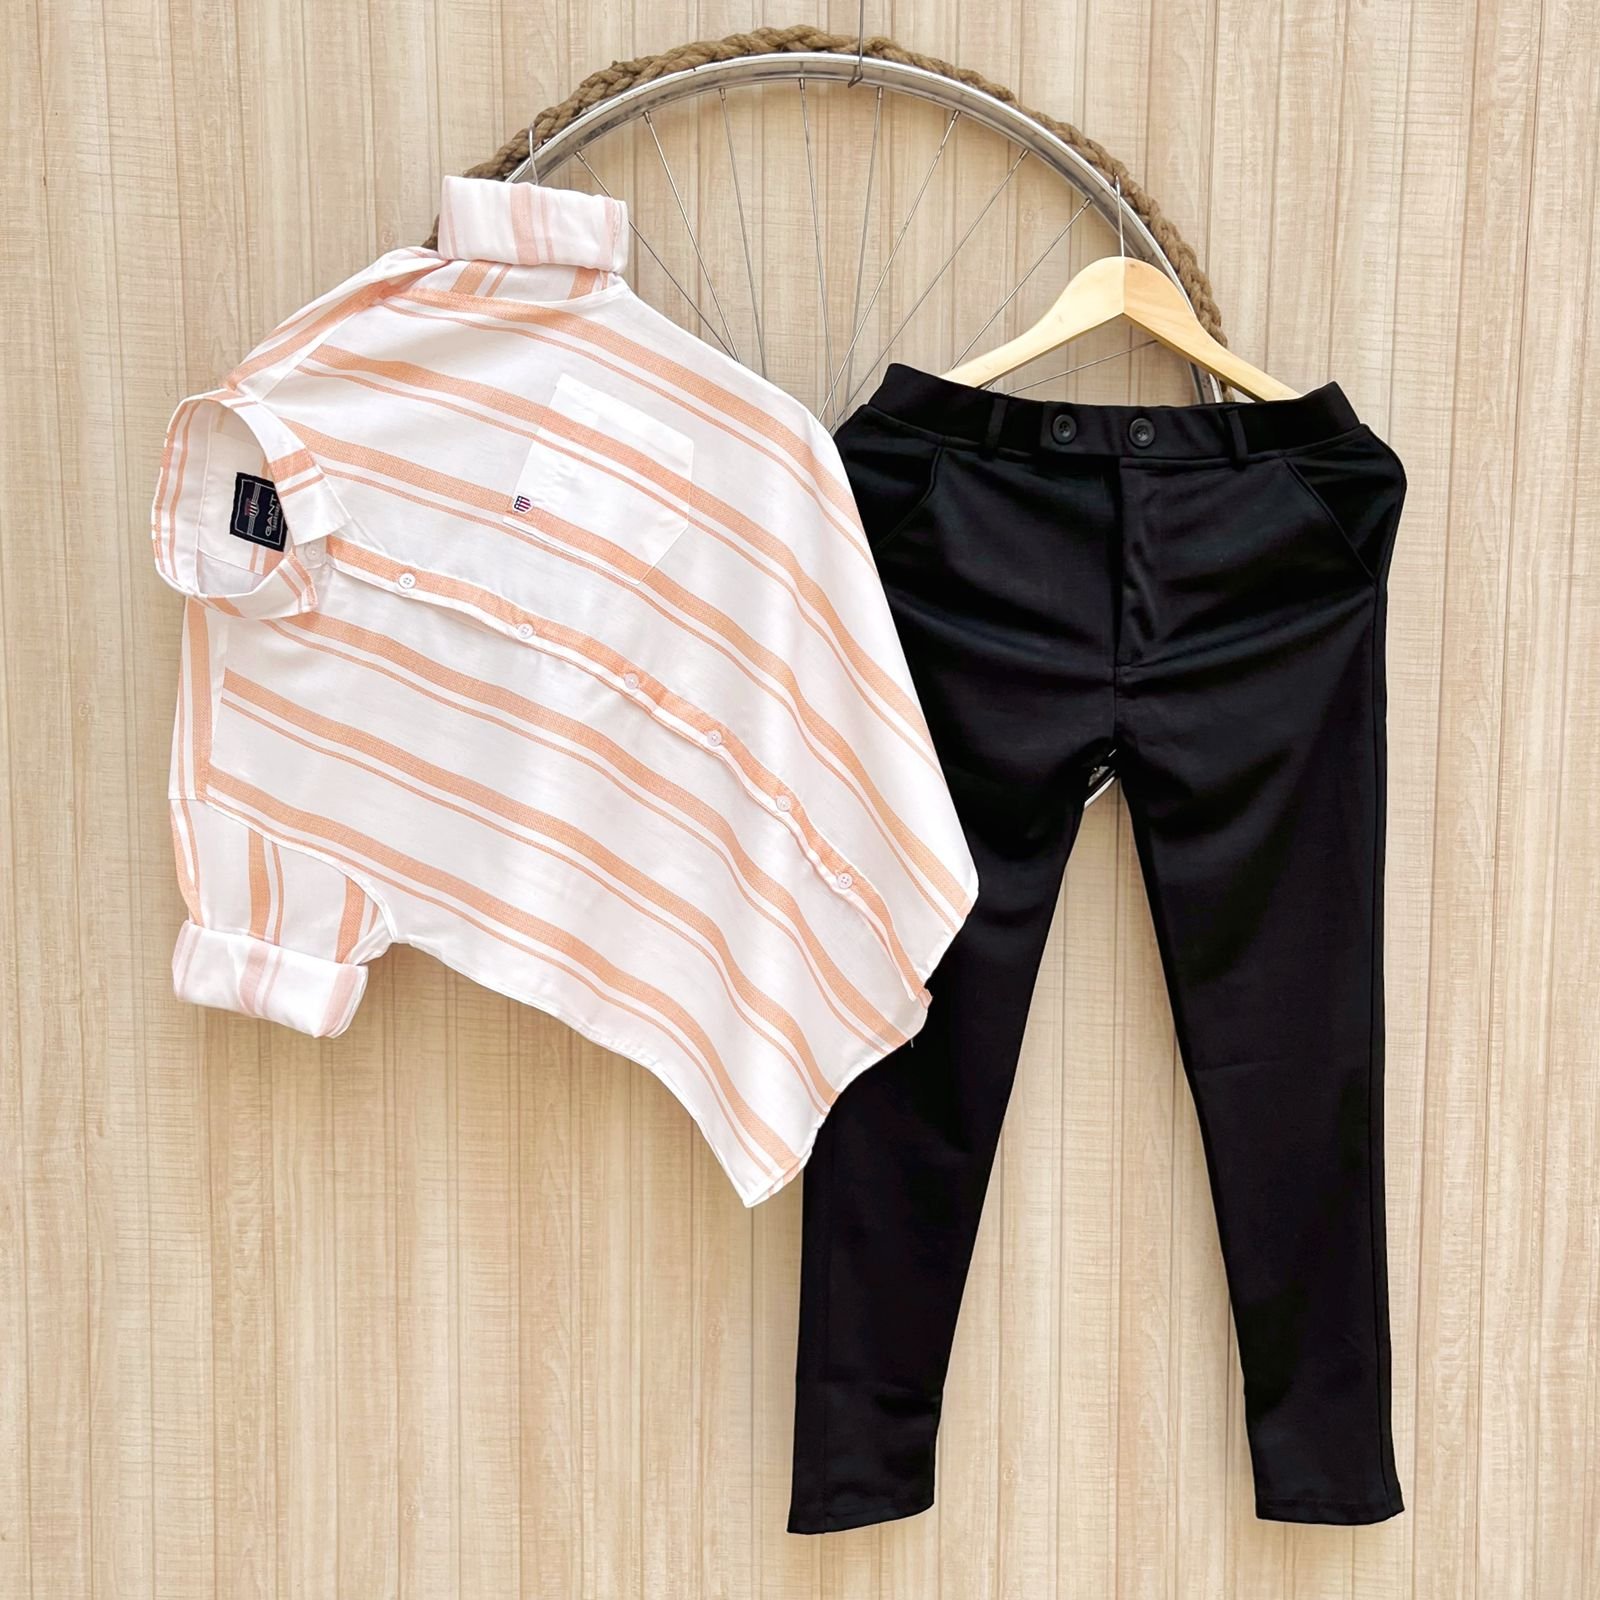 Formal Shirt Trouser Combination with Shoes - Evilato-as247.edu.vn